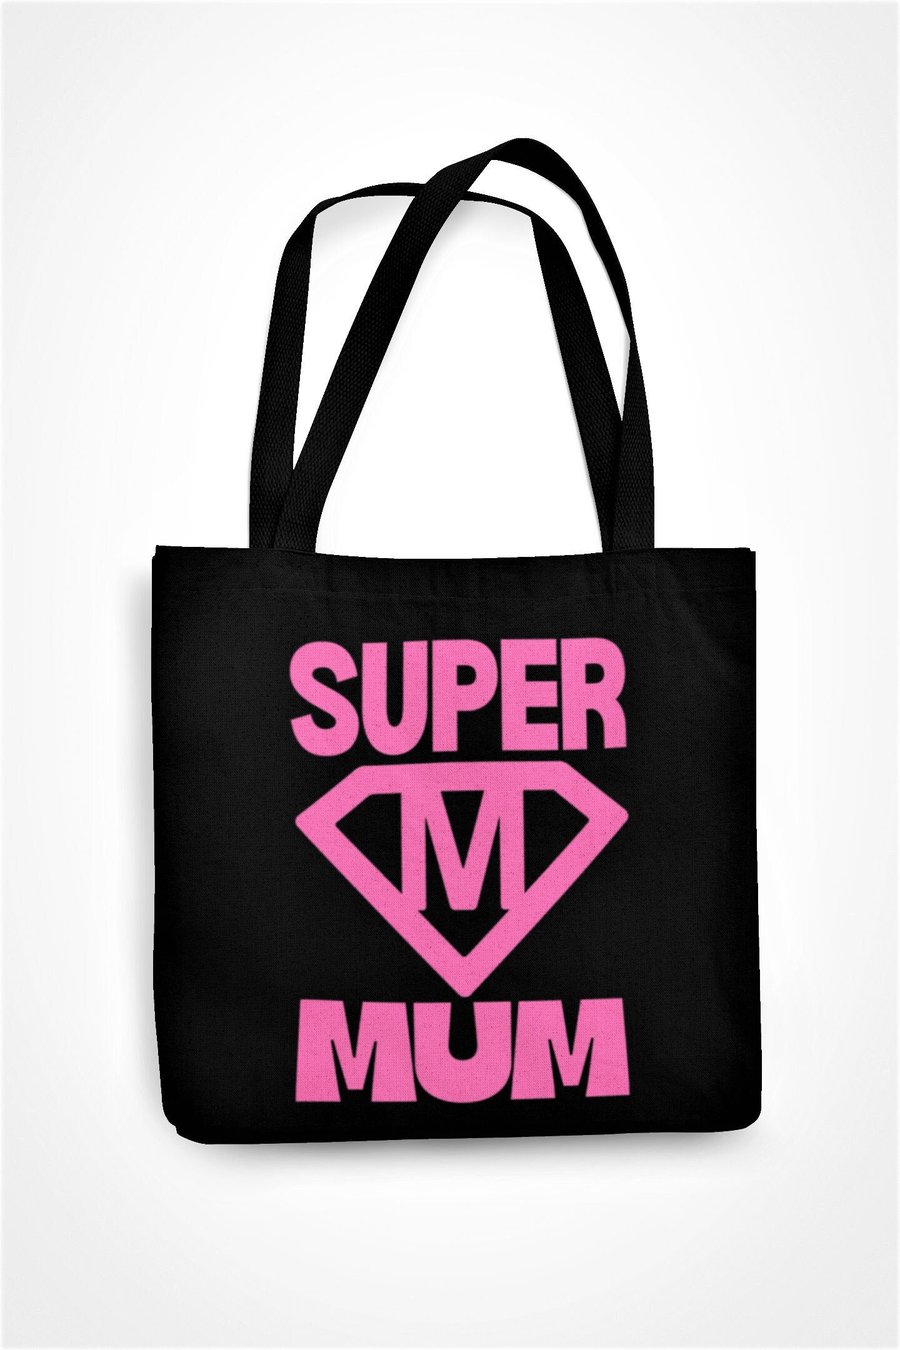 Super Mum Tote Bag Best Mum Shopping Bag Mothers Day Birthday Christmas Funny